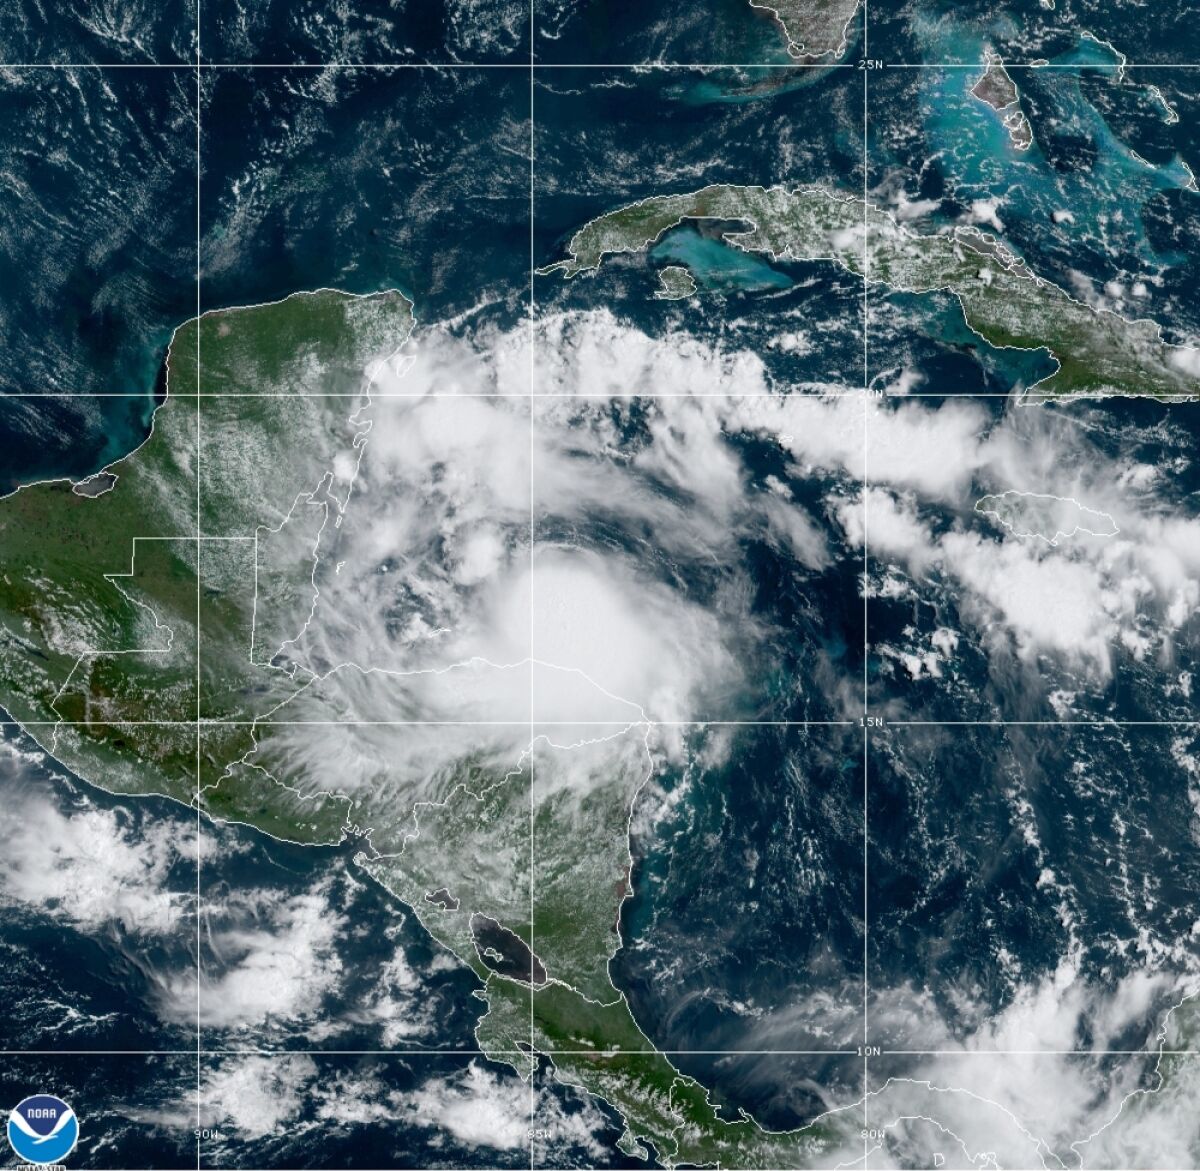 This satellite image released by the National Oceanic and Atmospheric Administration (NOAA) shows Tropical Storm Nana approaching Belize, Wednesday, Sept. 2, 2020. The storm is expected to strengthen throughout the day and make landfall in Belize as a hurricane late Wednesday or early Thursday. (NOAA via AP)